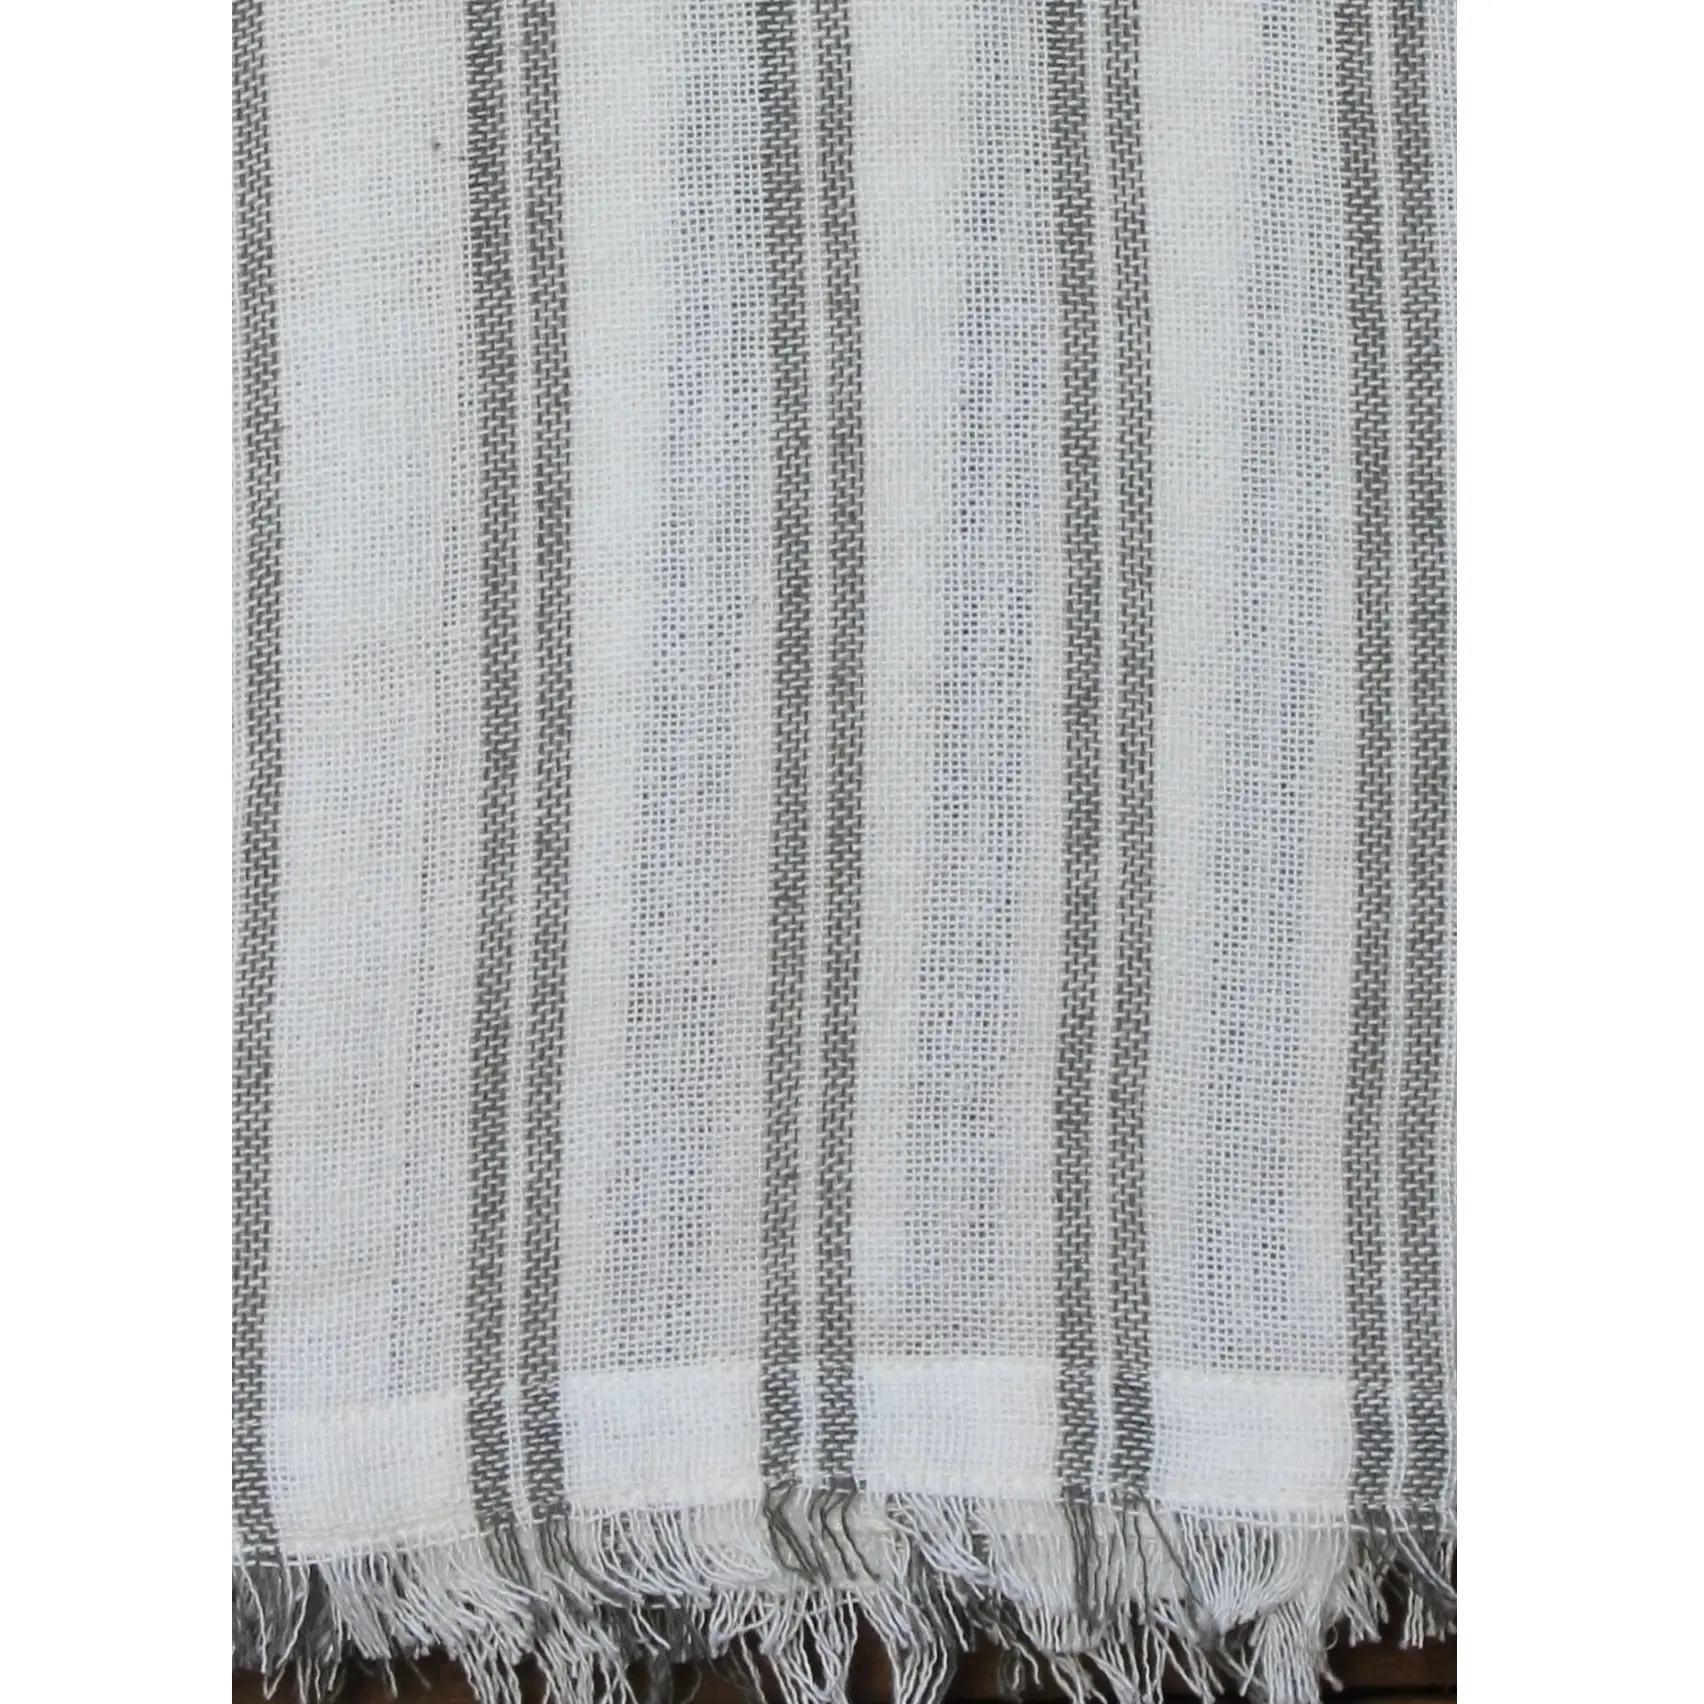 Gristmill Cream Towel